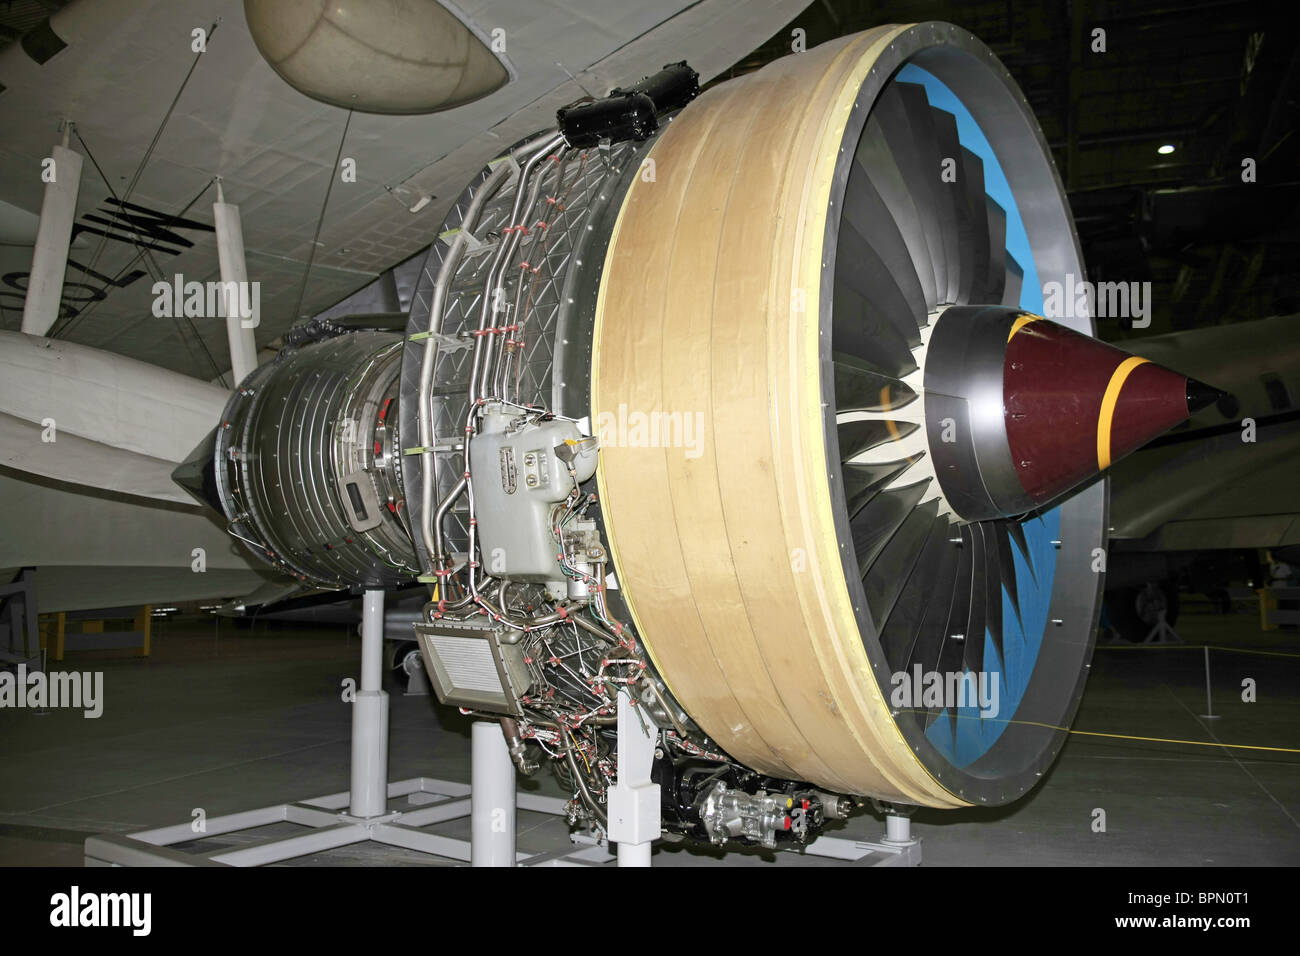 A Rolls Royce Trent turbo-fan jet engine on display in the AirSpace section at the Imperial War Museum Duxford Stock Photo